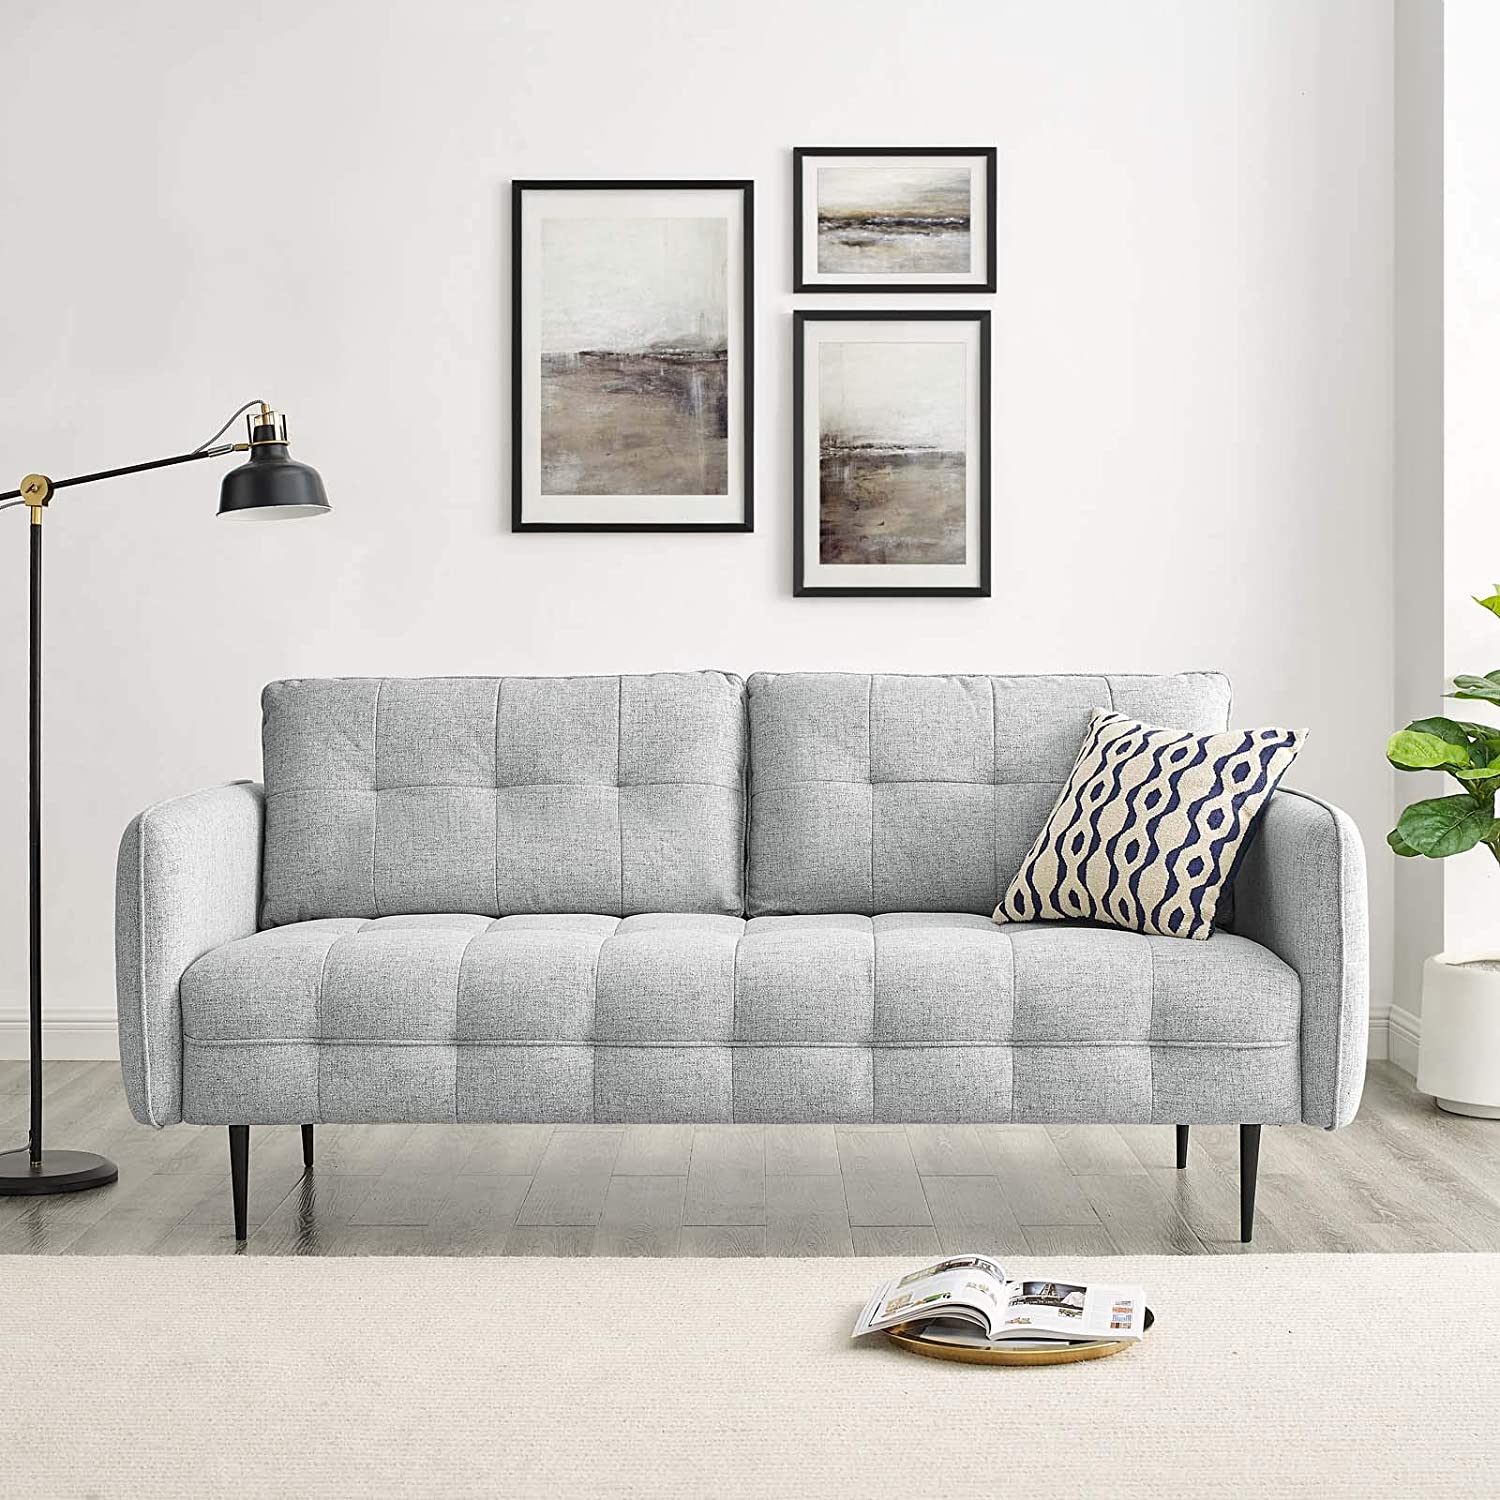 Sofa For Small Space Living Room Sofa For Small Living Room Space ...